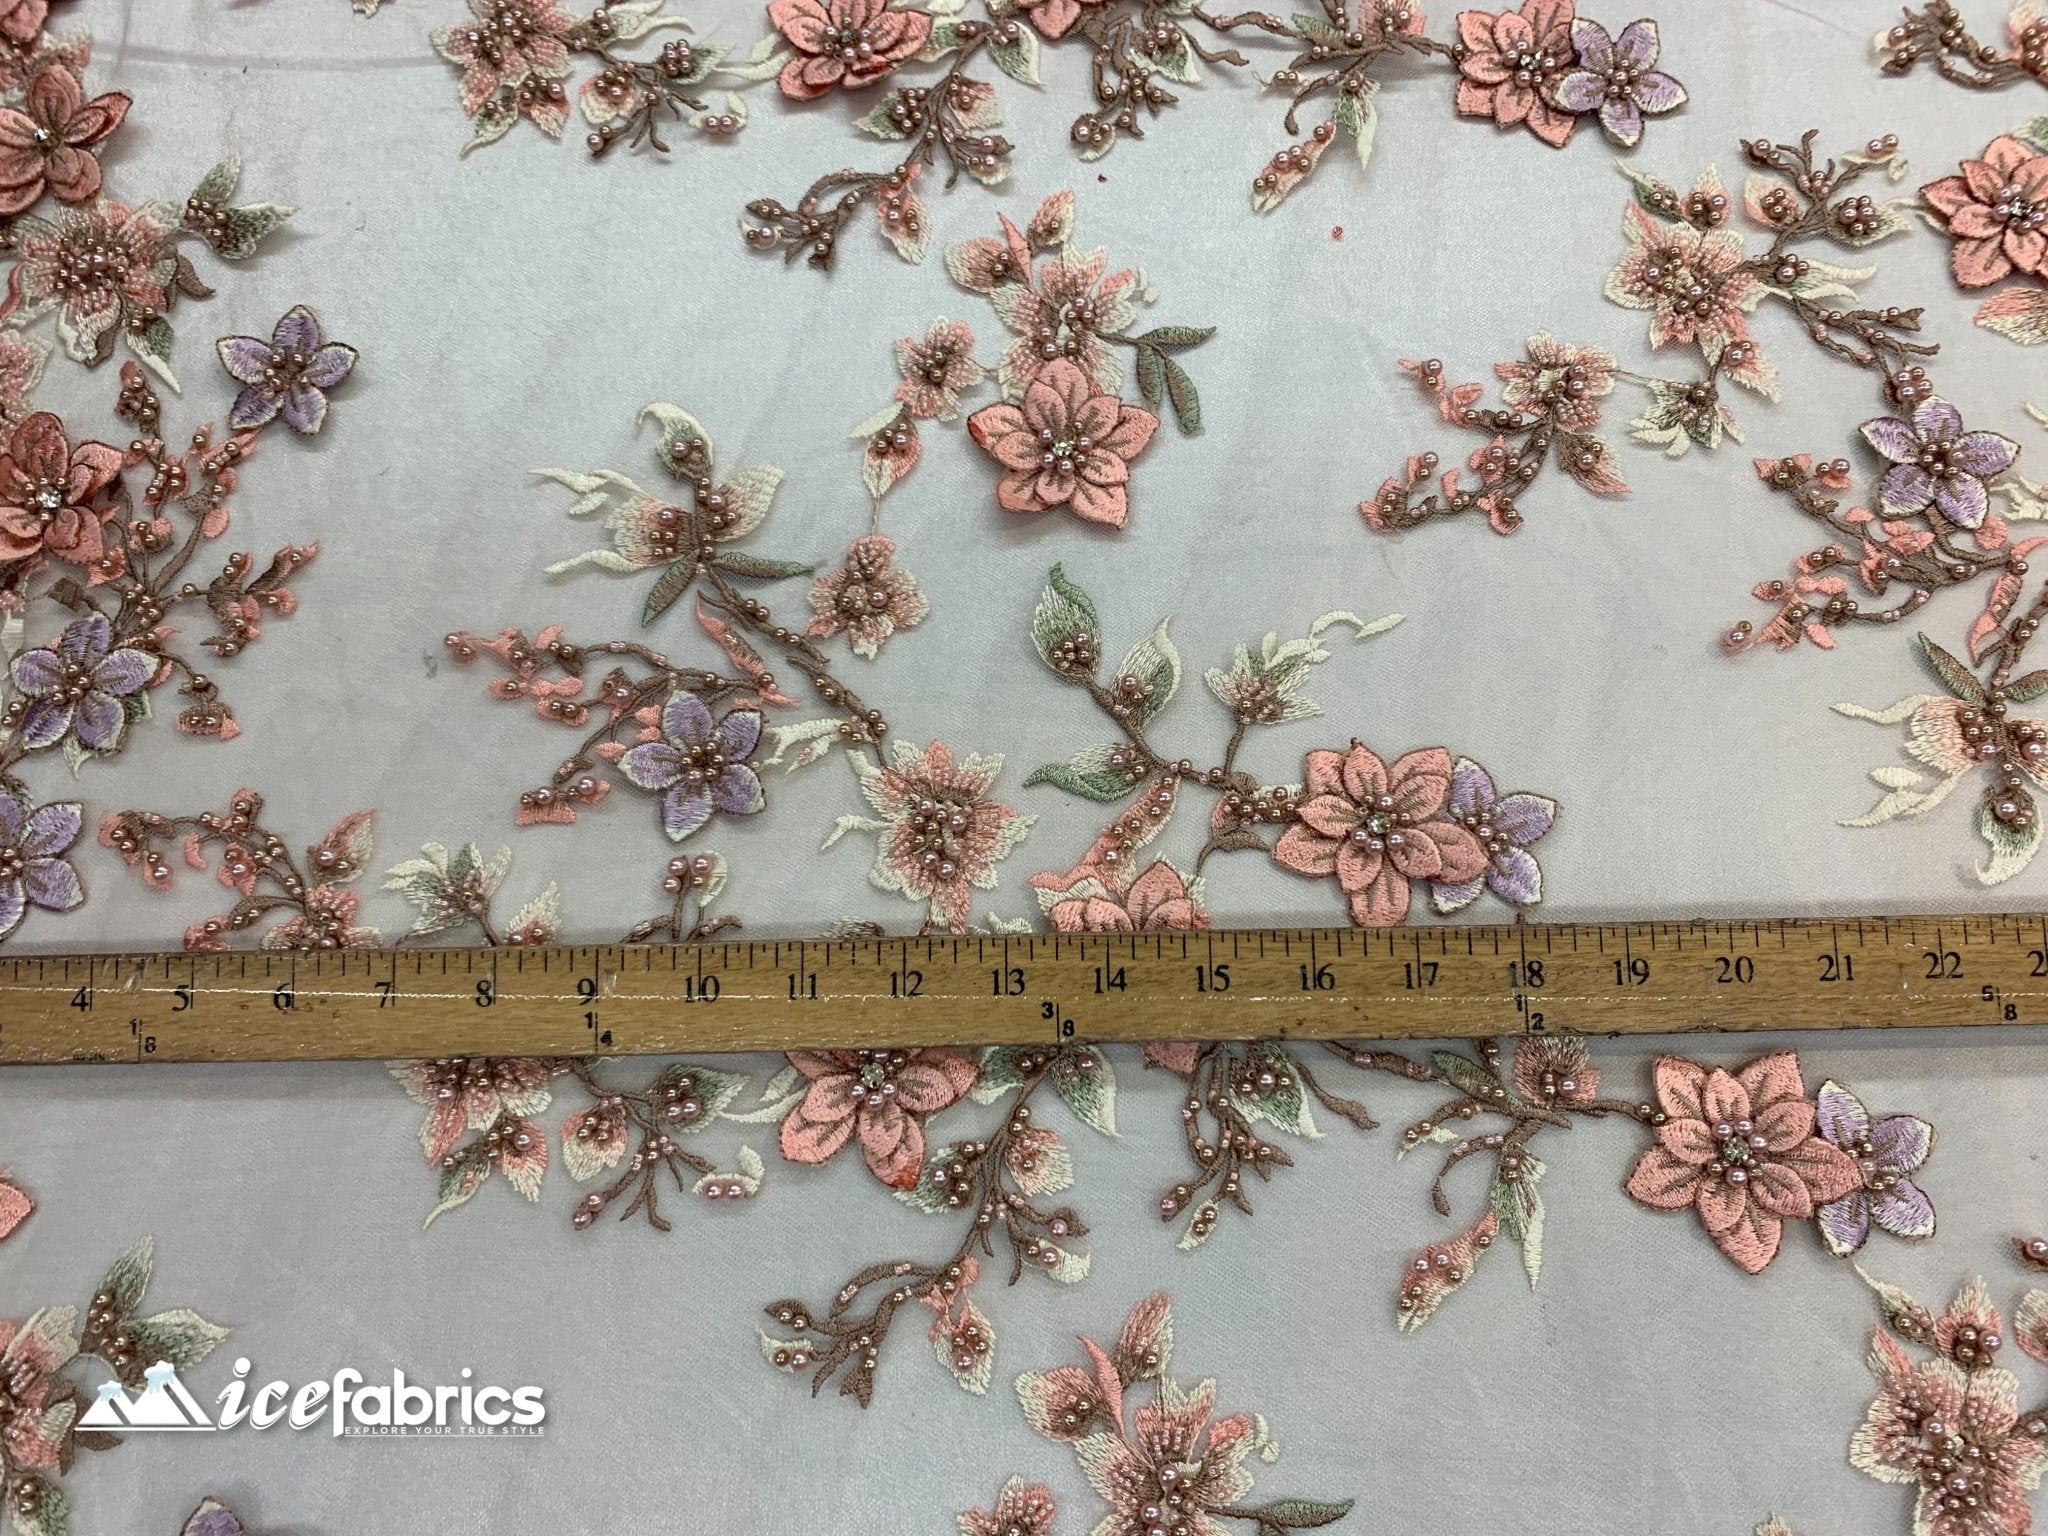 Embroidered Fabric/ 3D Flowers Beaded Fabric/ Lace Fabric/ Dusty RoseICE FABRICSICE FABRICSDusty RoseEmbroidered Fabric/ 3D Flowers Beaded Fabric/ Lace Fabric/ Dusty Rose ICE FABRICS